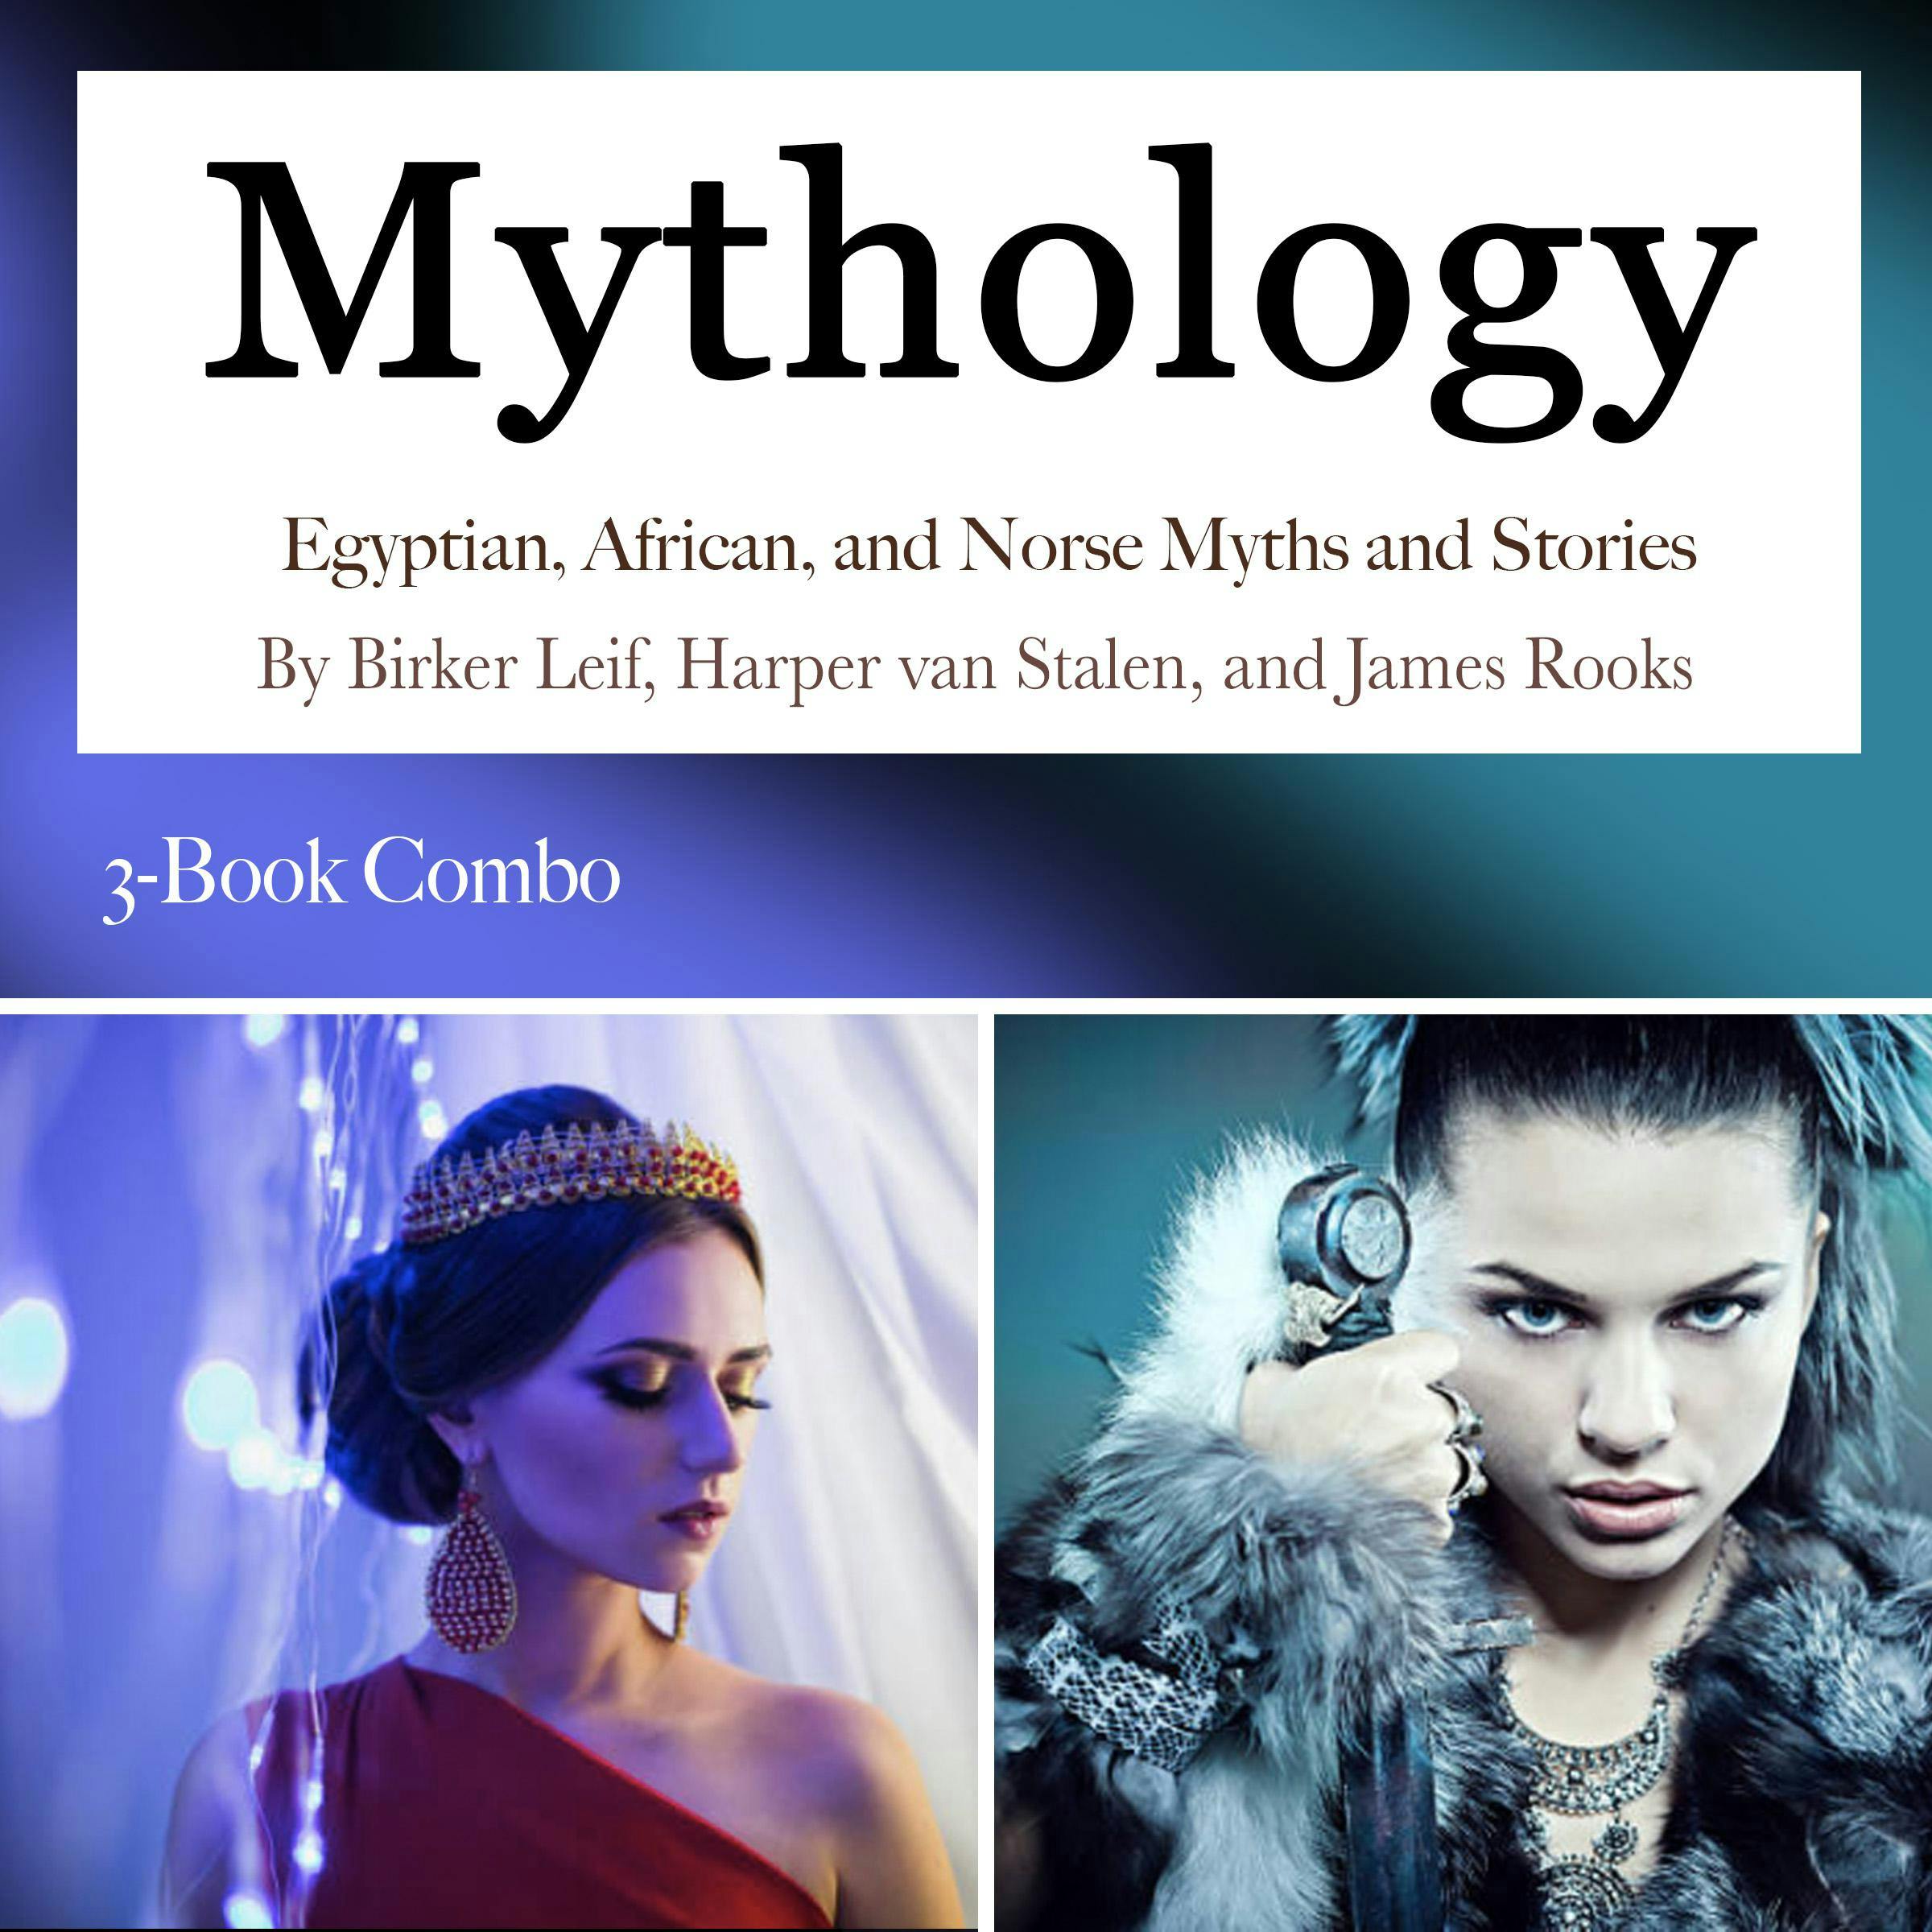 Mythology: Egyptian, African, and Norse Myths and Stories - James Rooks, Birker Leif, Harper van Stalen